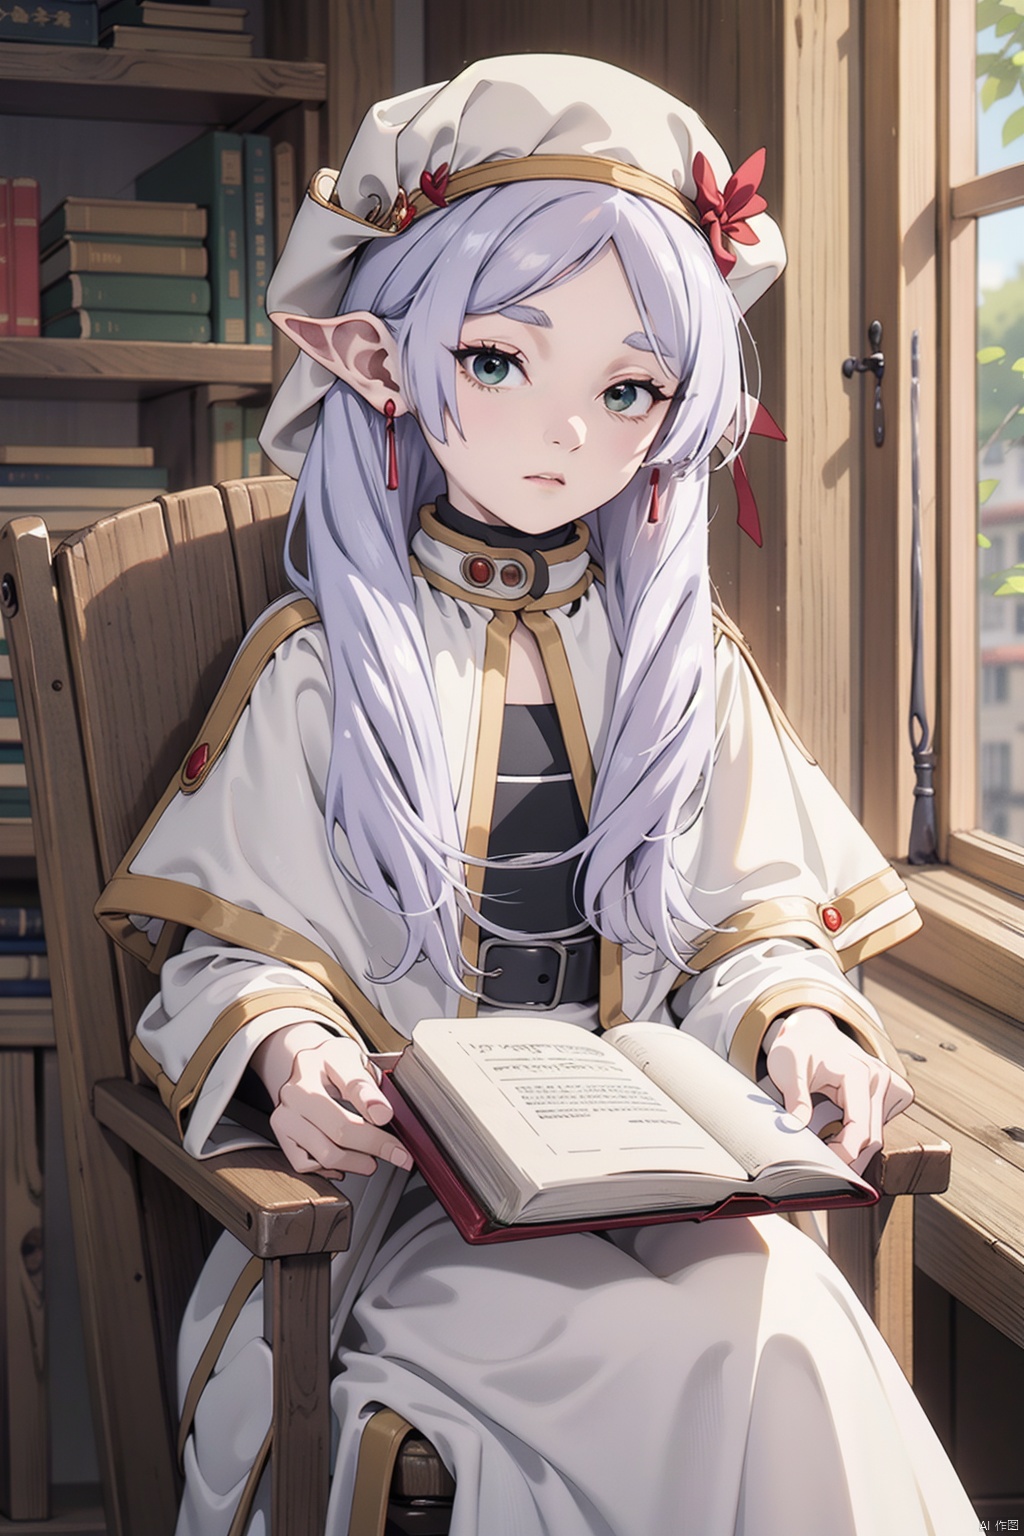  Frieren at the Funeral,Goblin ear,1 girl,knowledge of patchouli,solo,white hair,long hair,cup,hat,new moon,tea cup,book,sitting,ribbon,reading,cloak,chair,tea,anime coloring,hair bow,treeribbon,, REVERSE UPRIGHT STRADDLE